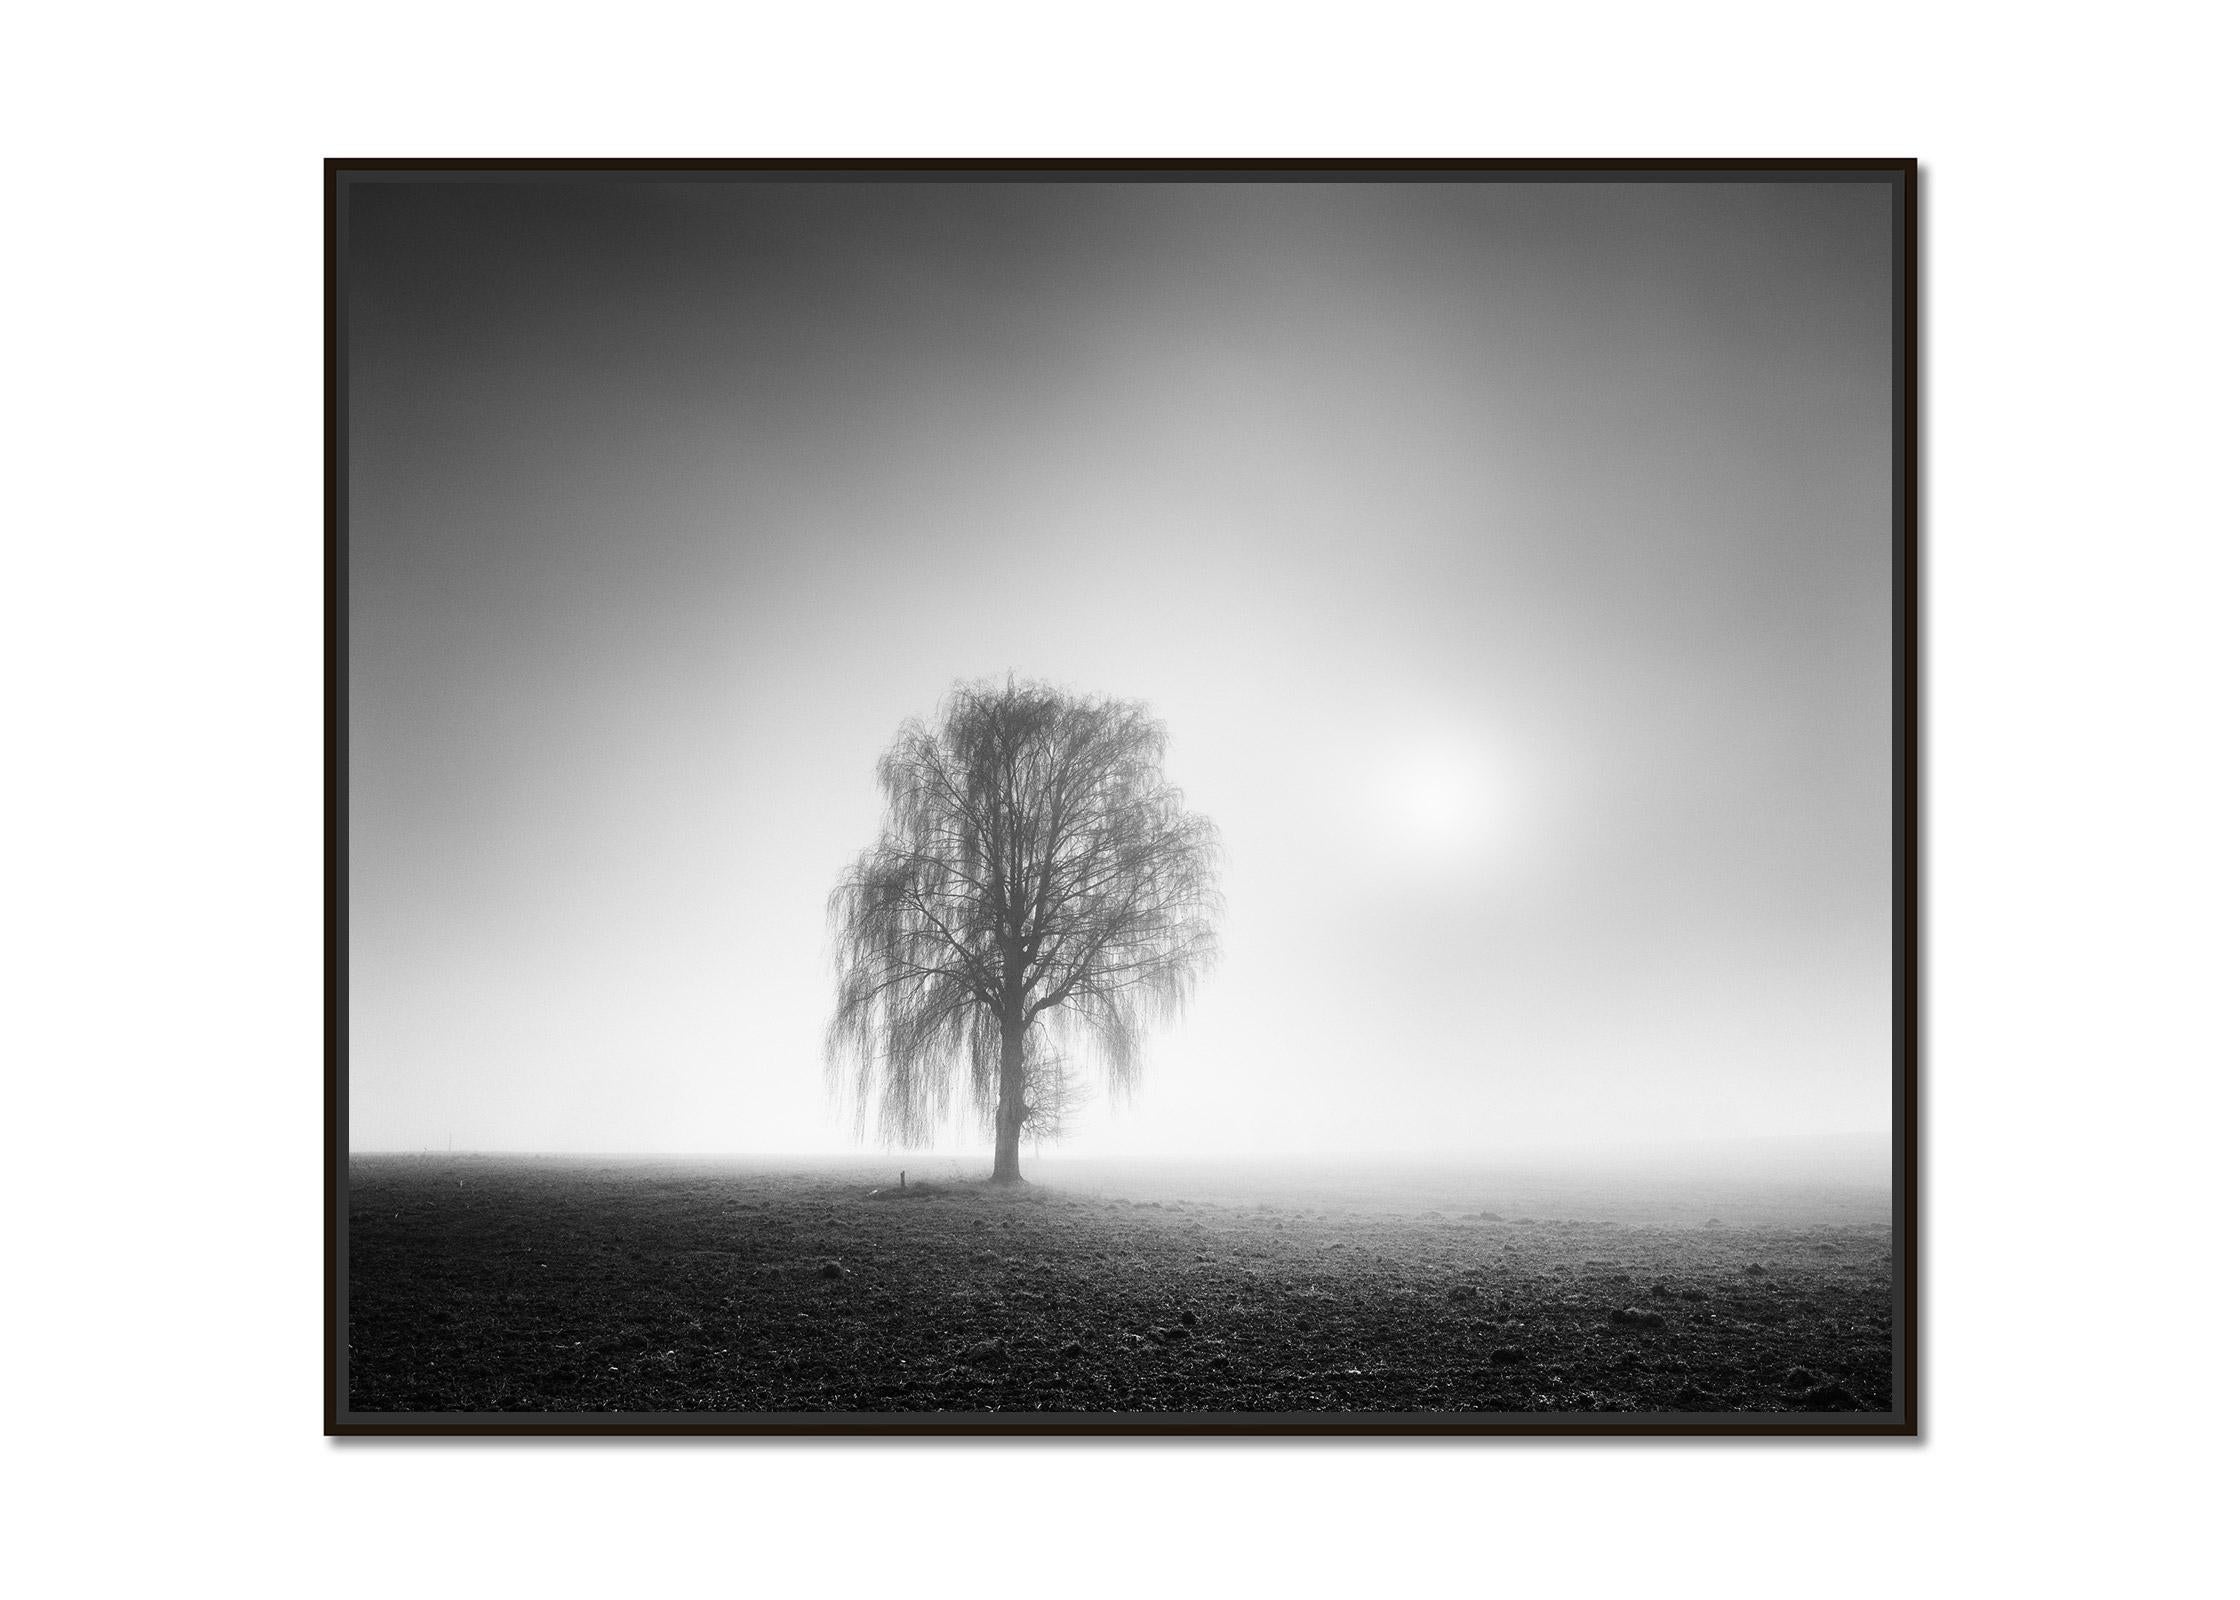 Foggy Morning, single Tree, Austria,  black and white landscape art photography - Photograph by Gerald Berghammer, Ina Forstinger